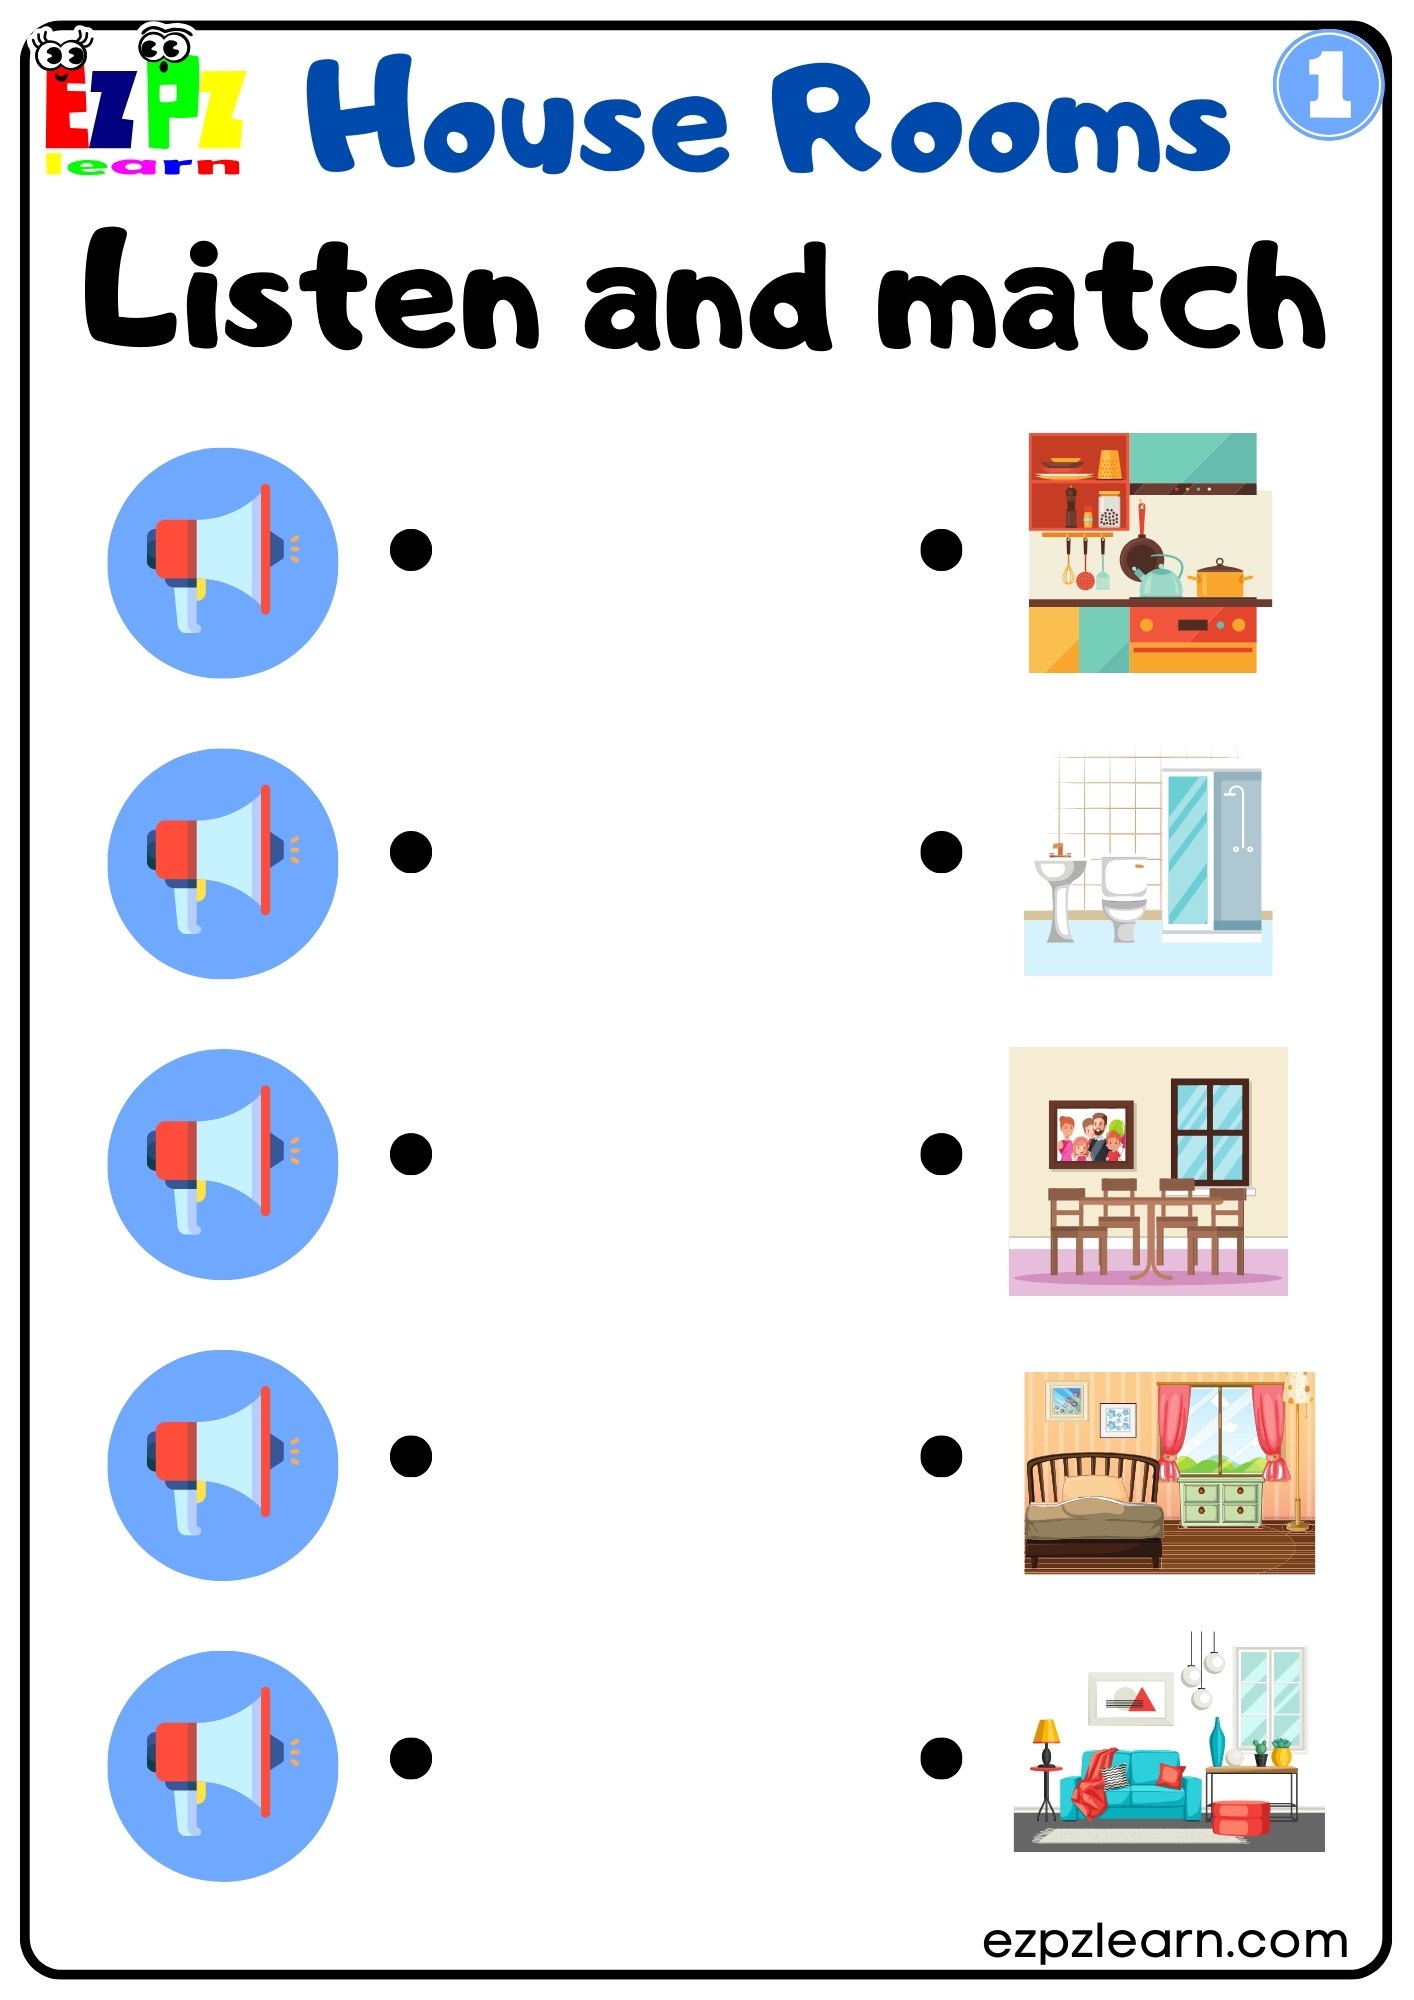 Rooms in the house interactive worksheet for grade 1